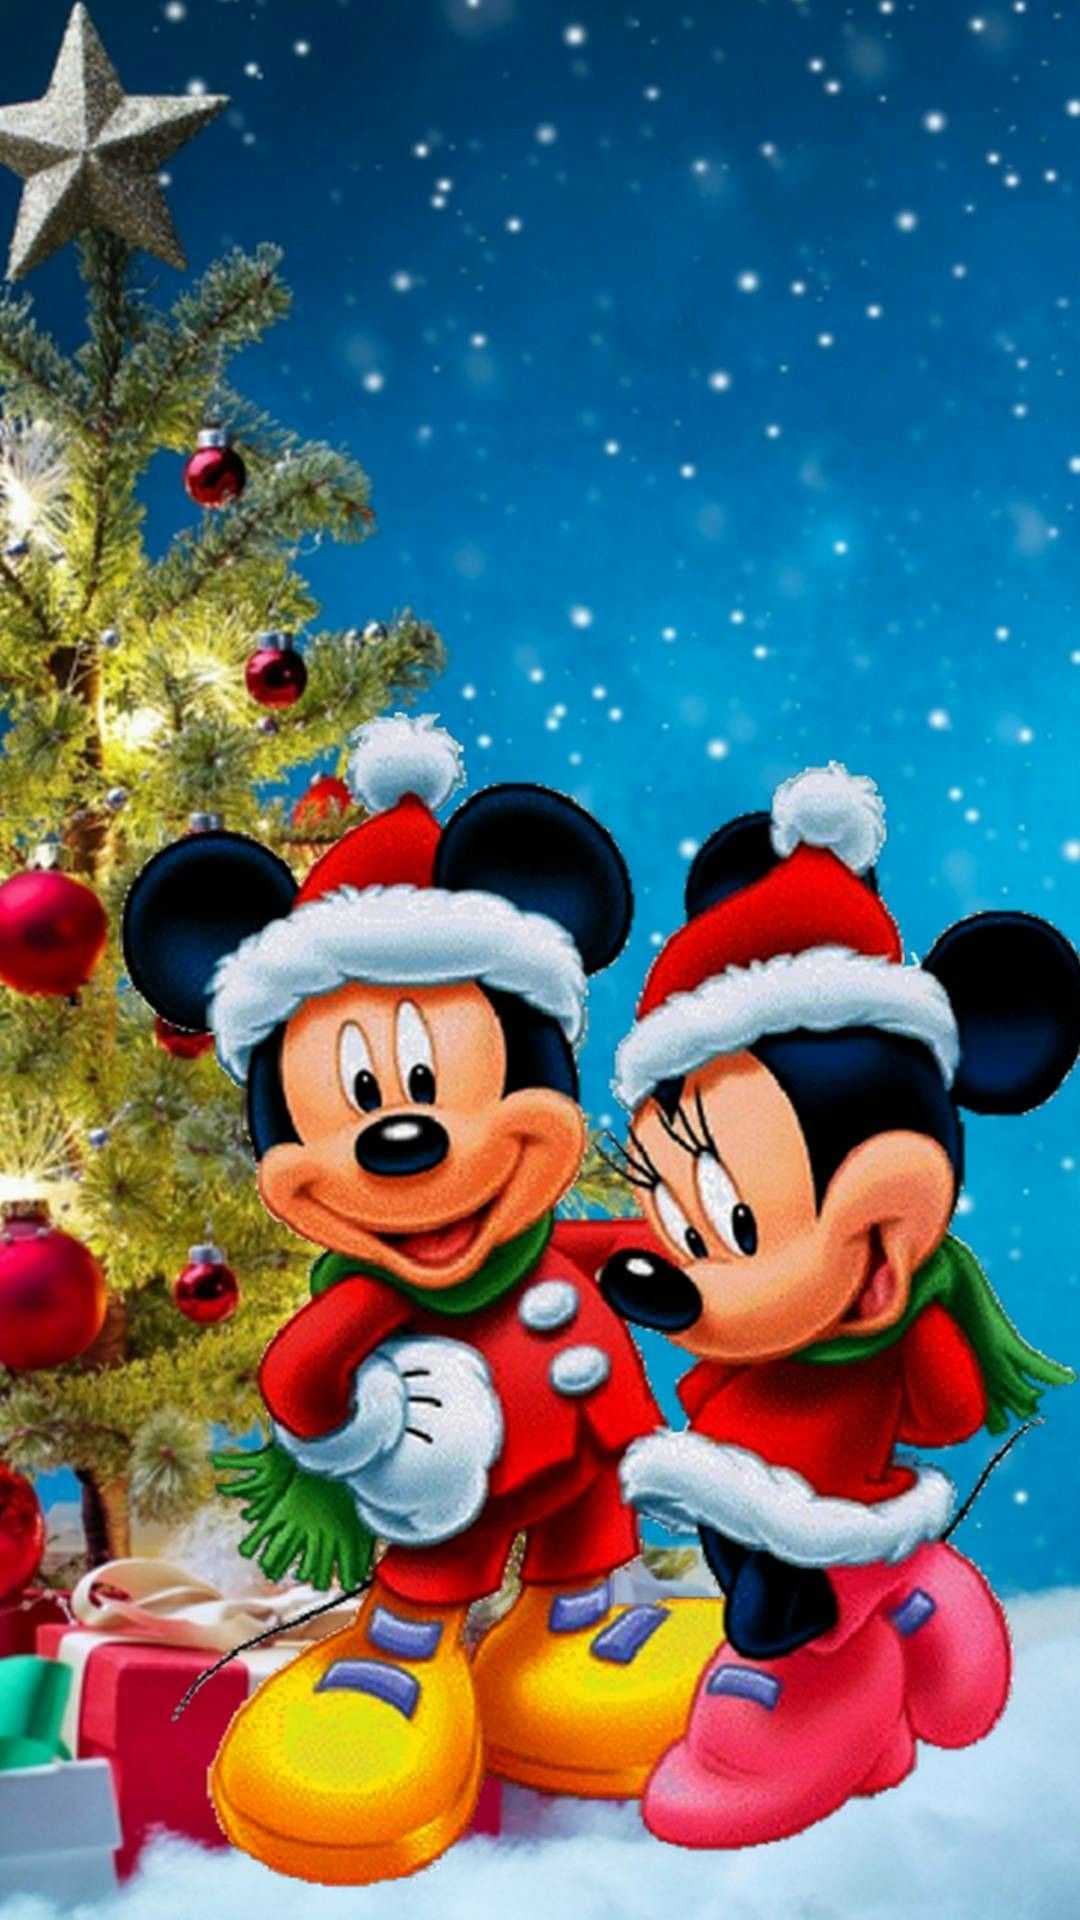 Mickey & Minnie Christmas. Mickey mouse picture, Mickey mouse wallpaper, Mickey mouse christmas